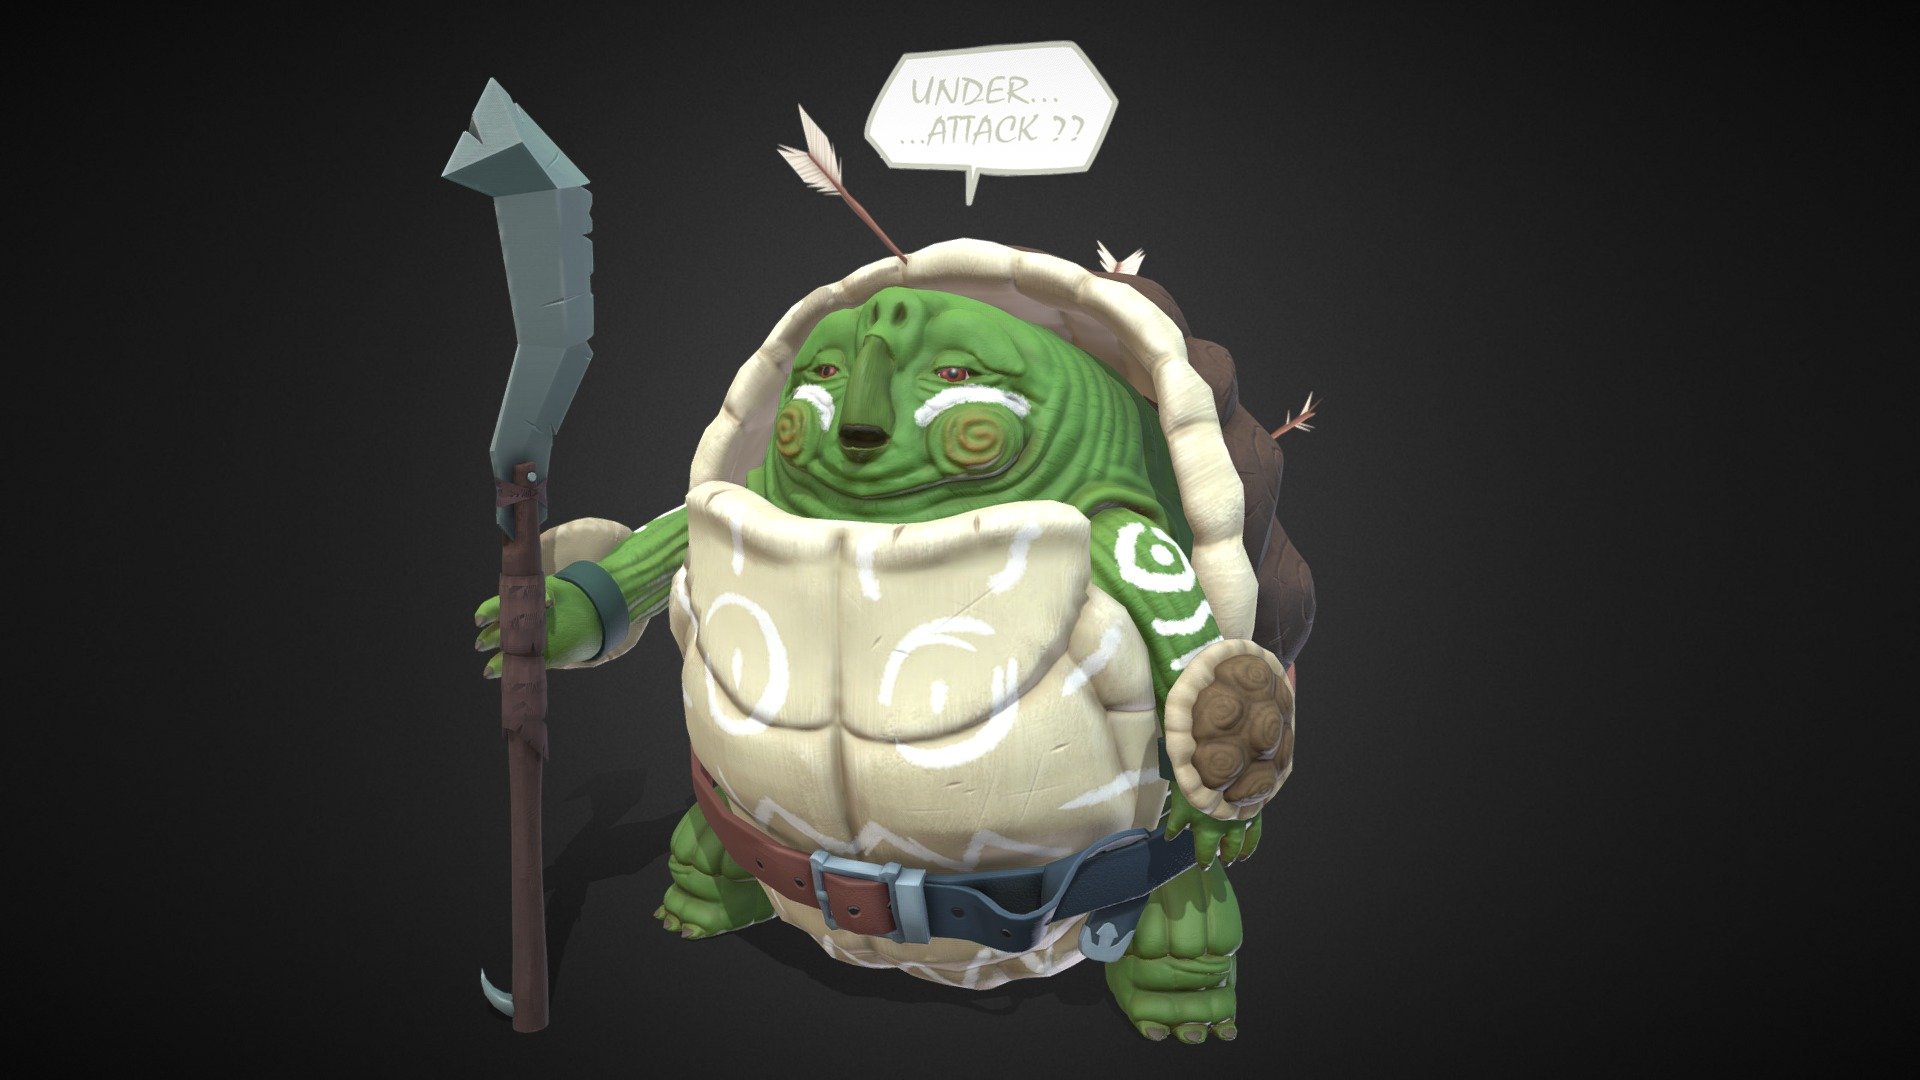 Character concept created by Gerrit Willemse. https://www.instagram.com/p/COvPbsuD0OY/ - Turtle Character Animated - 3D model by Millie Fisher (@_millwills) 3d model